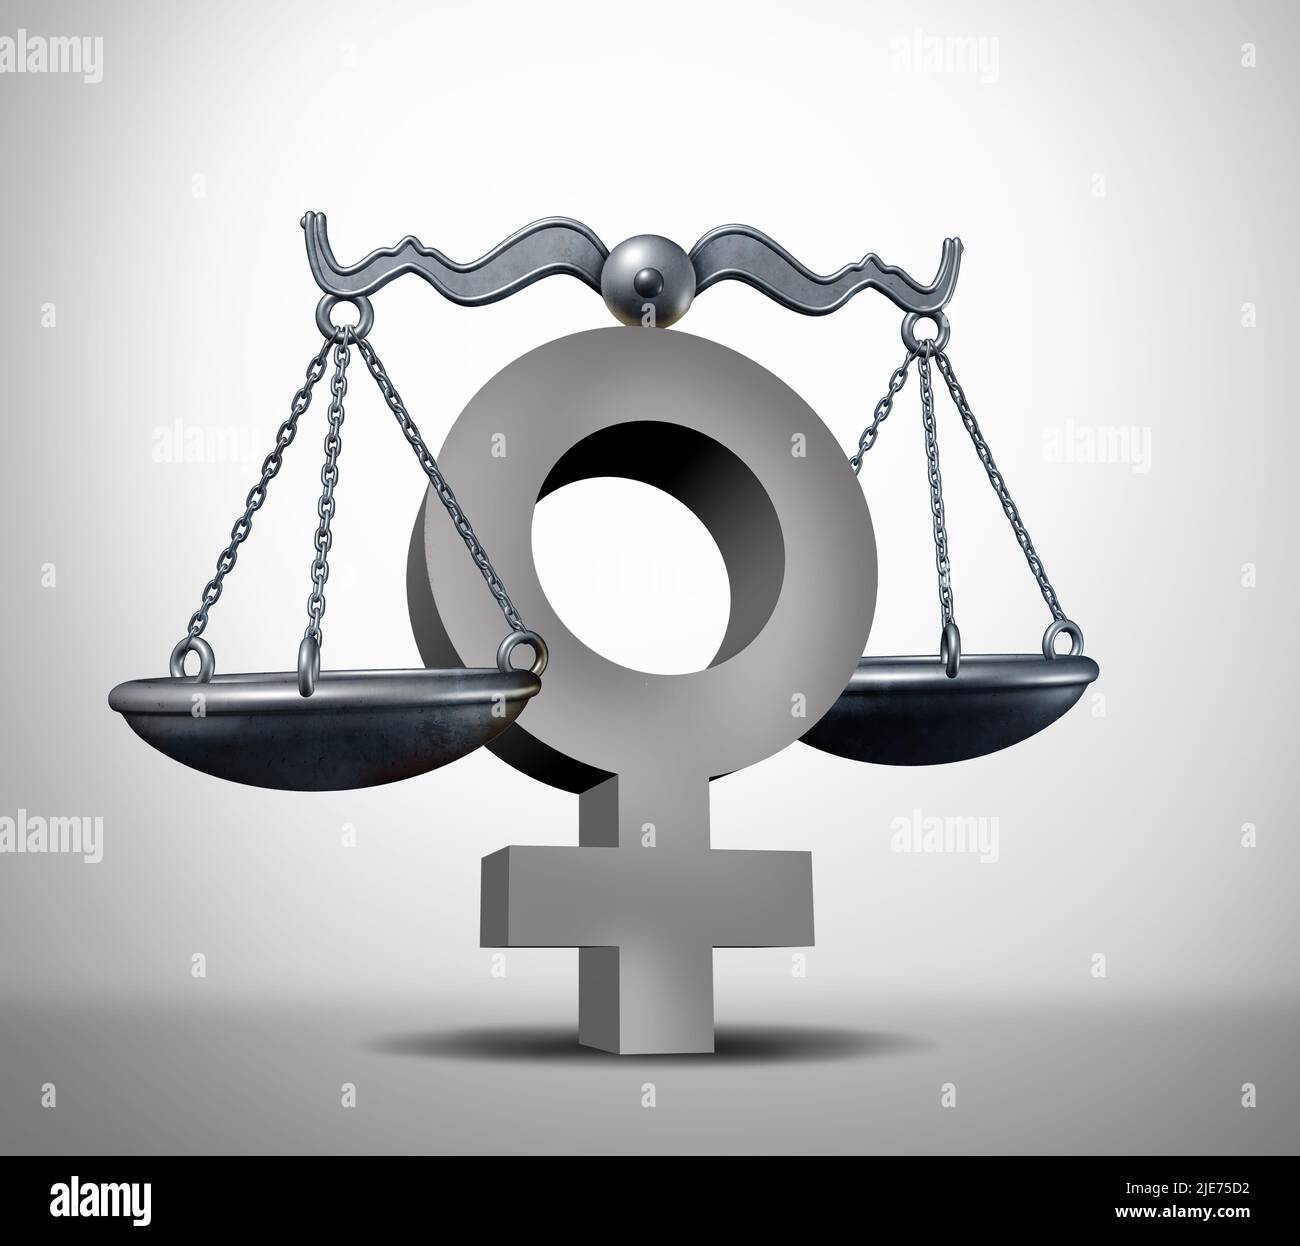 Female reproductive rights and gender equality or Abortion bill women justice as a legal concept for reproduction rights as legislation. Stock Photo